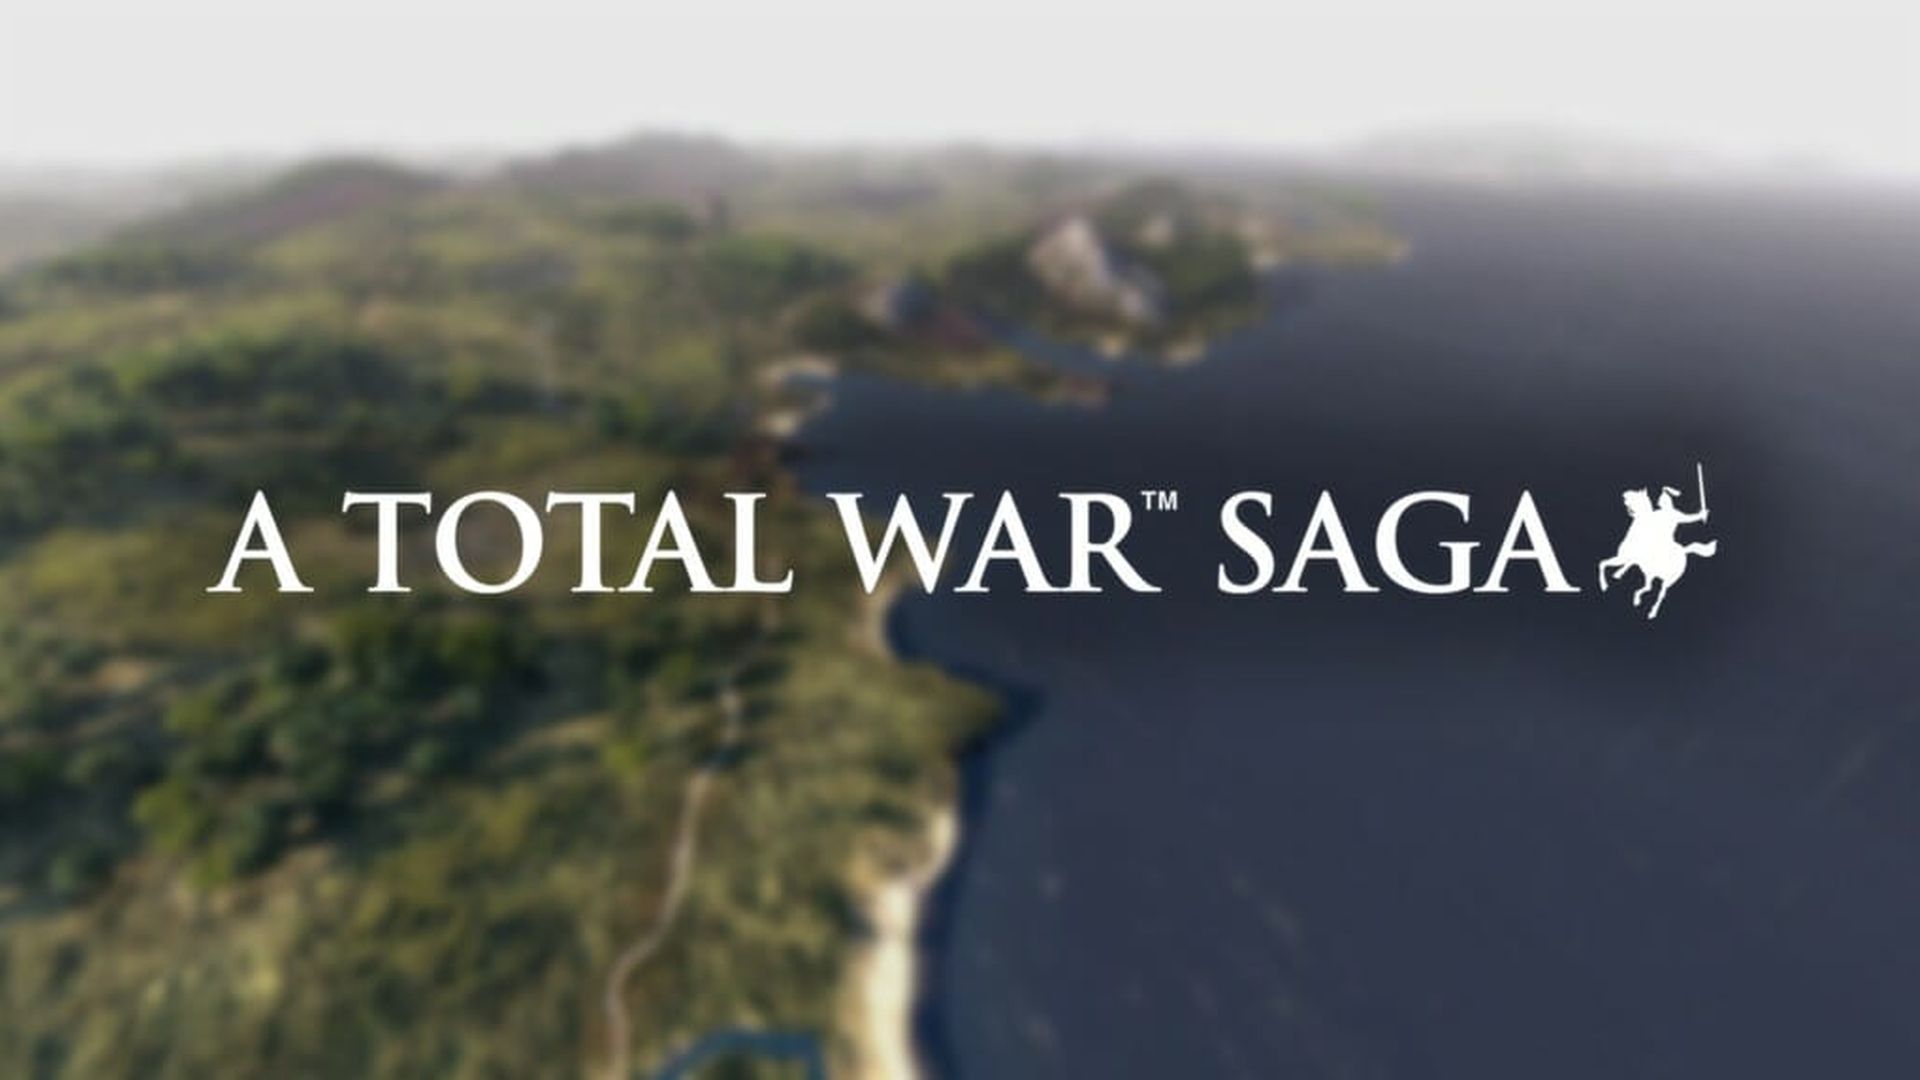 Looks like Troy: A Total War Saga is official